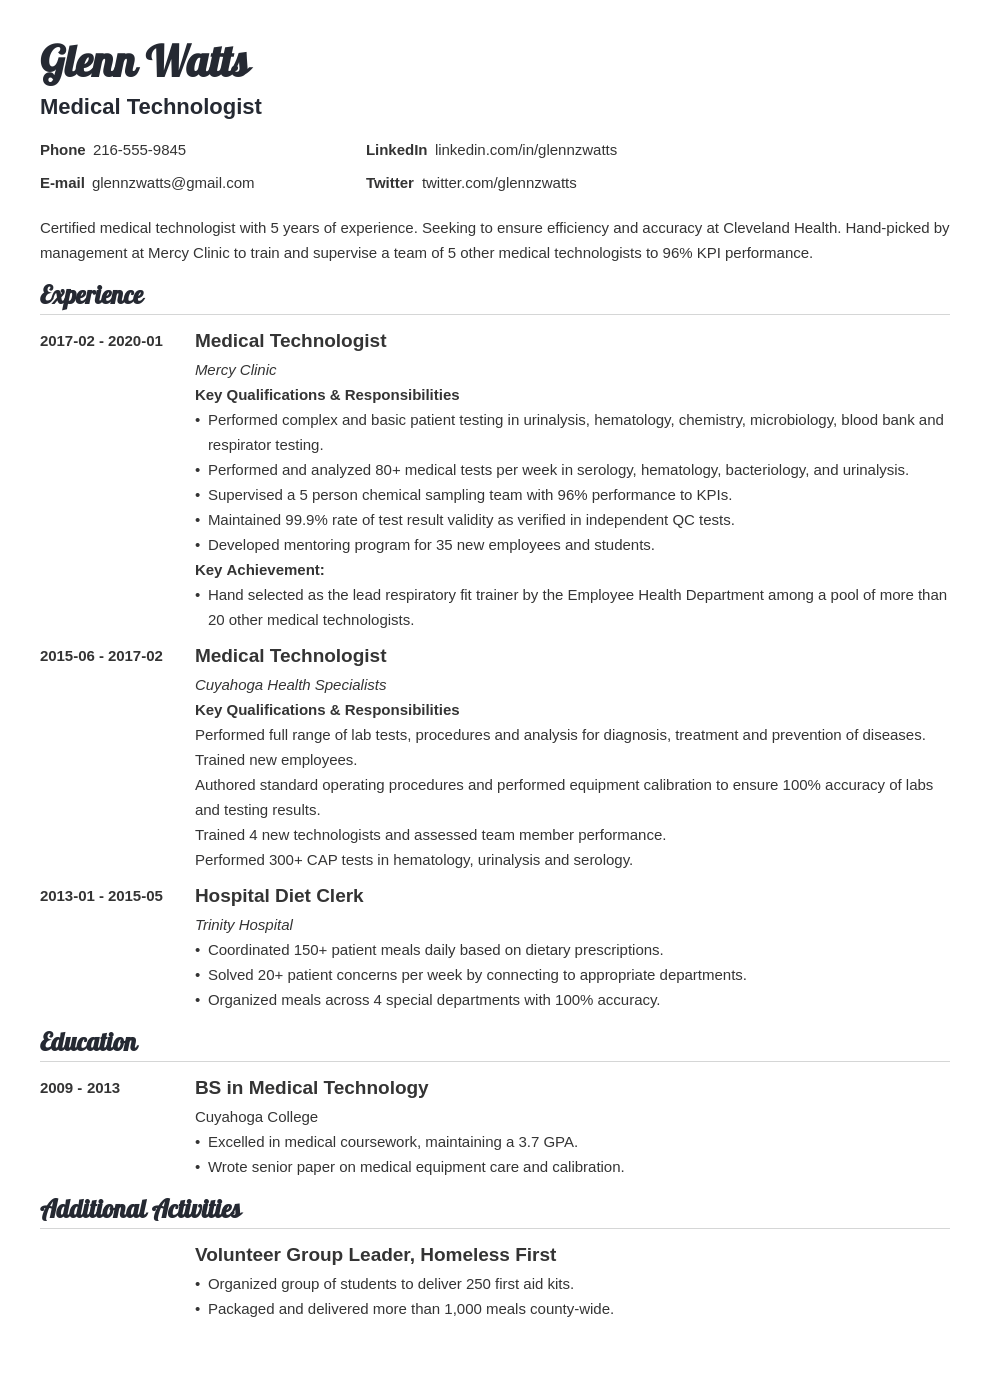 Medical Technologist Resume: Samples and Guide